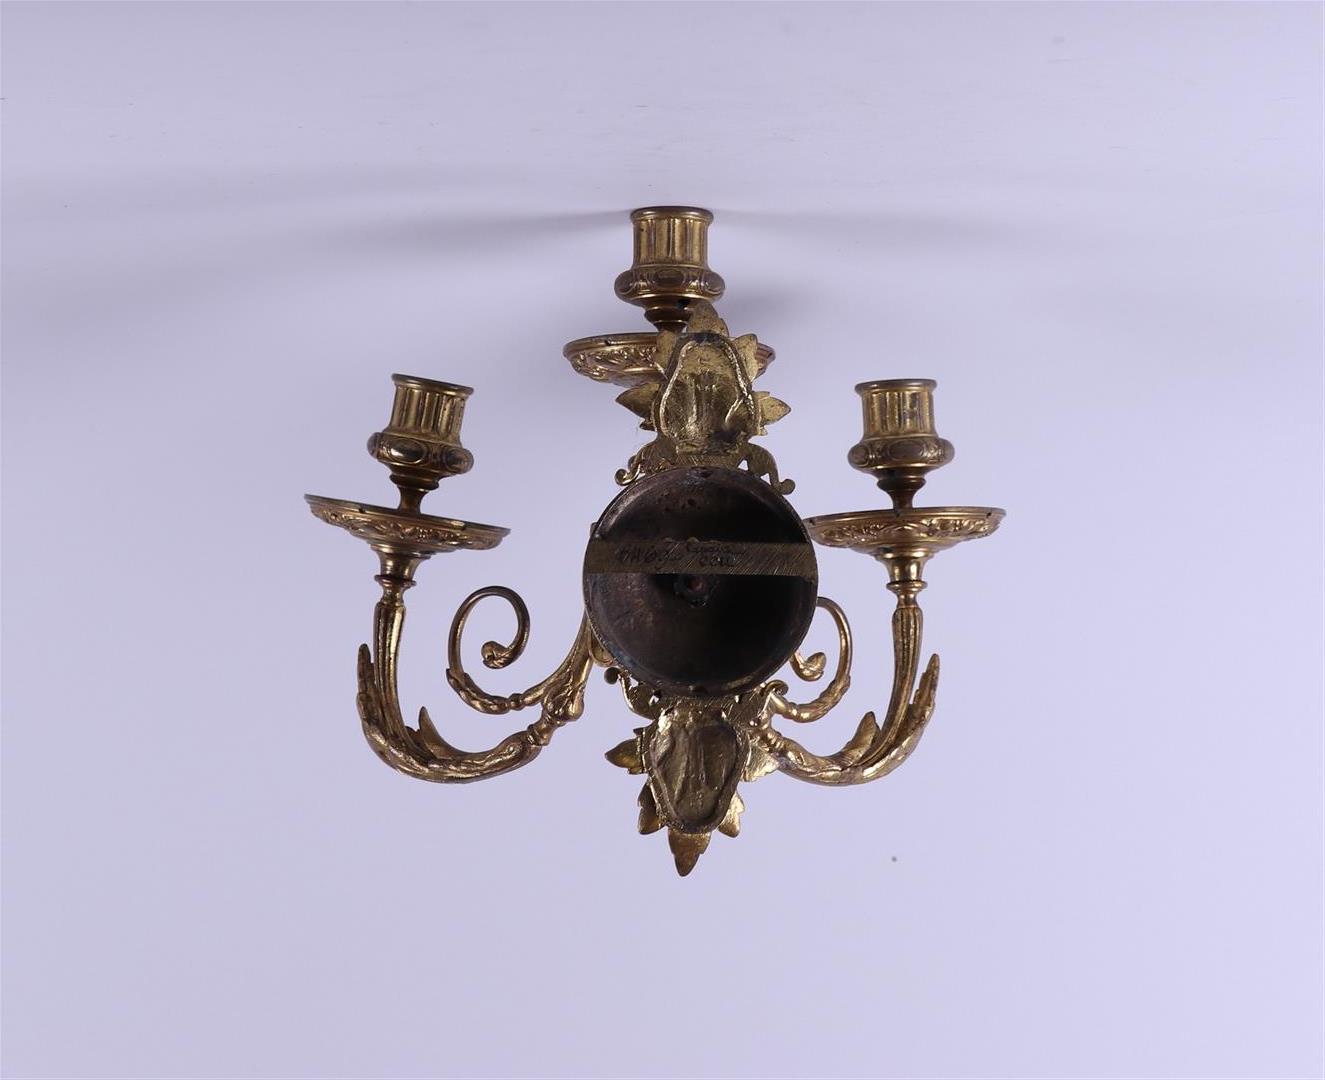 A brass three-armed wall chandelier.Ca. 1900. - Image 2 of 2